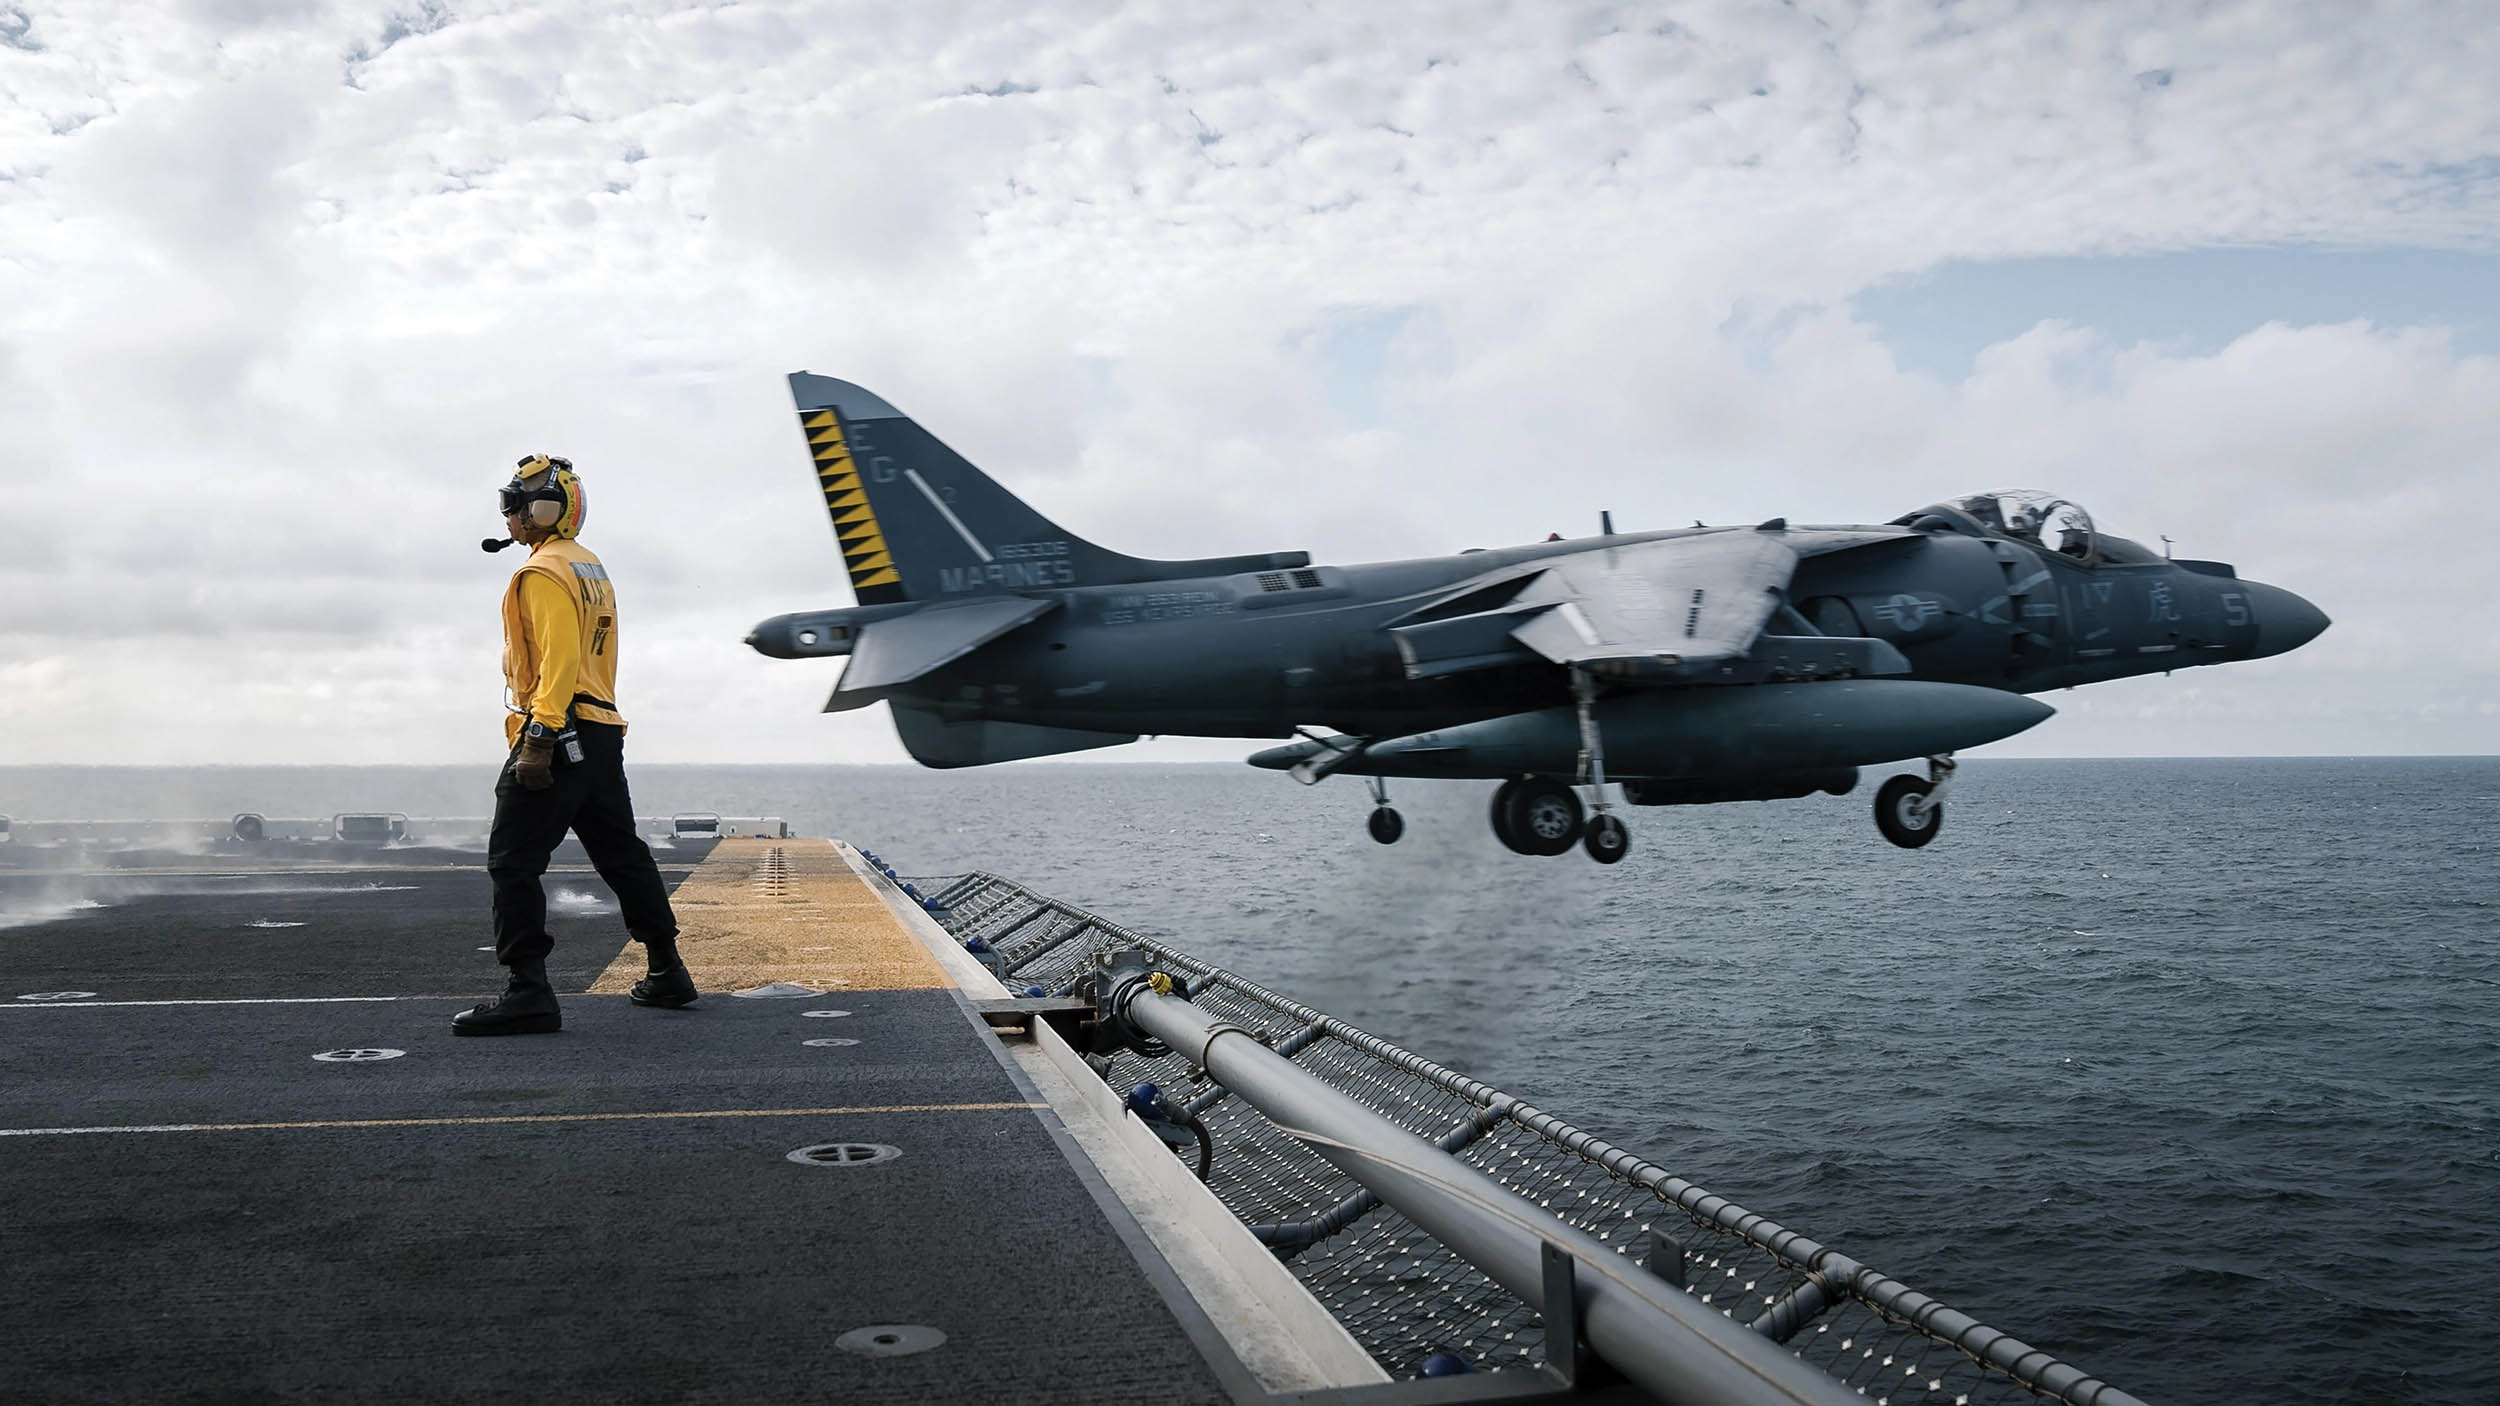 Marine Corps AV-8B Harrier attached to 22nd Marine Expeditionary Unit flies past Navy Aviation Boatswain’s Mate (Handler) 1st Class Tu N. Chau during flight operations aboard USS Kearsarge in Baltic Sea, August 24, 2022 (U.S. Navy/Taylor Parker)